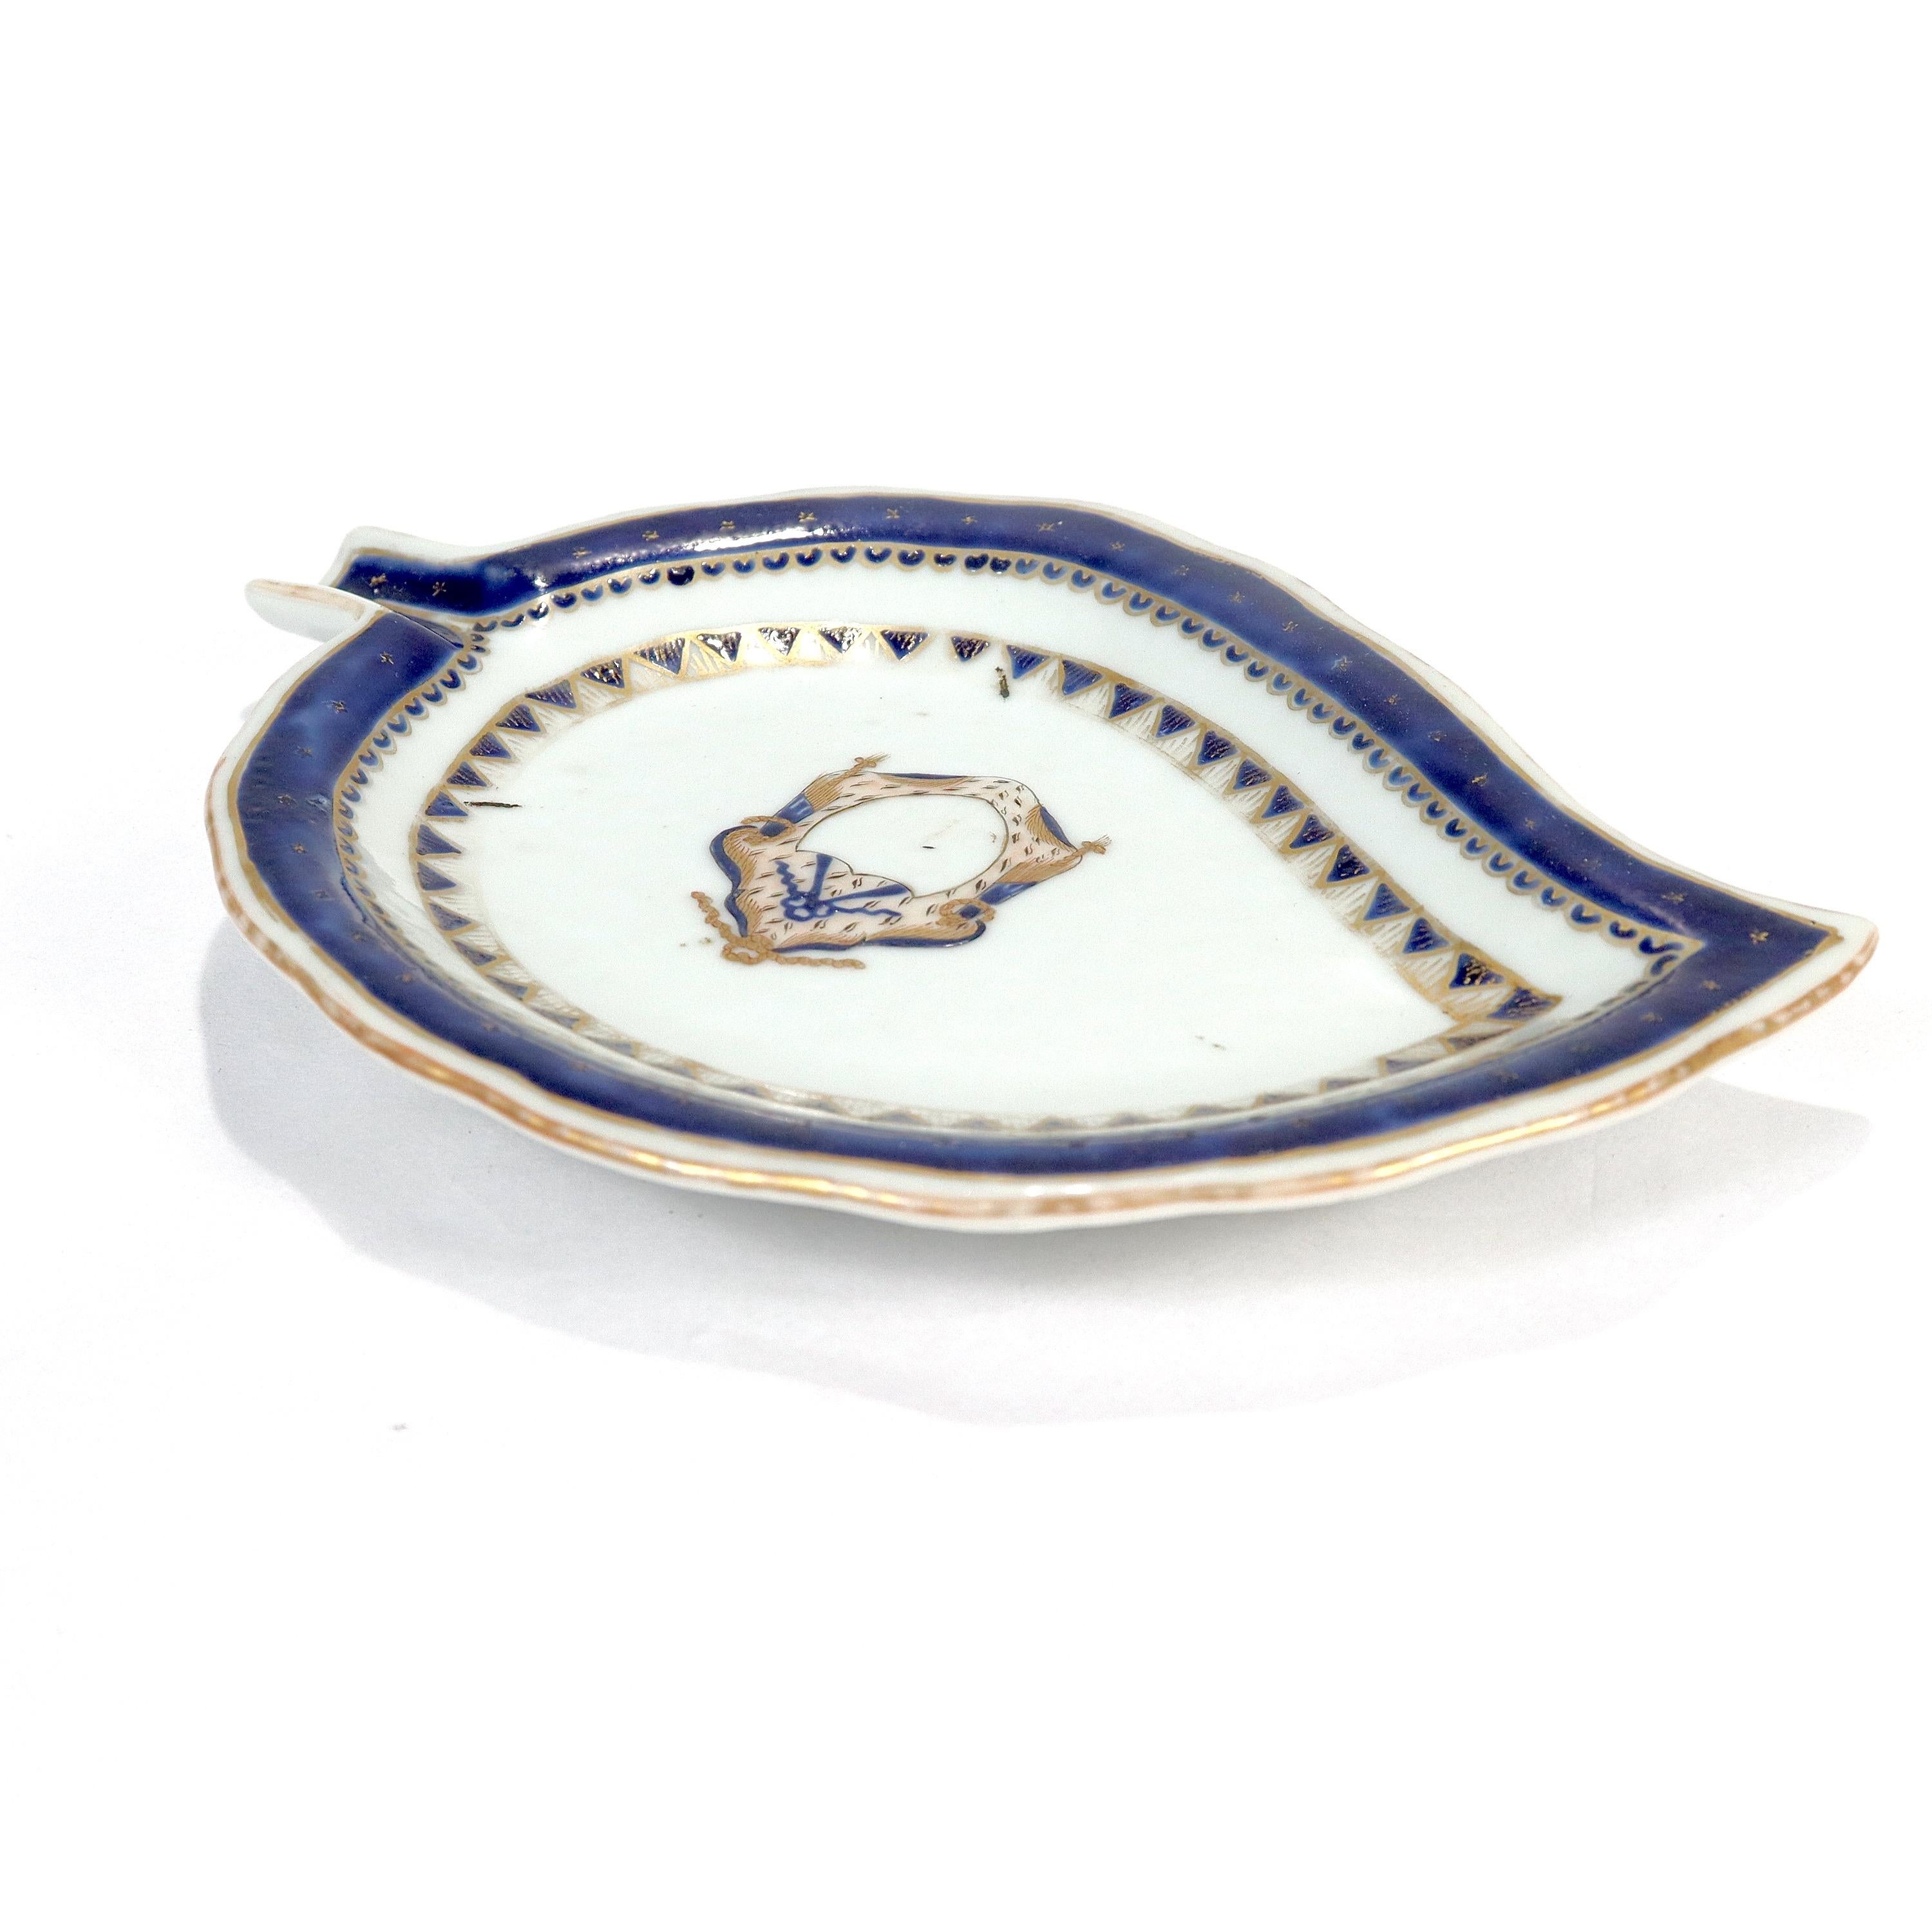 20th Century Old or Antique Chinese Export Porcelain Armorial Tobacco Leaf Form Dish / Plate For Sale